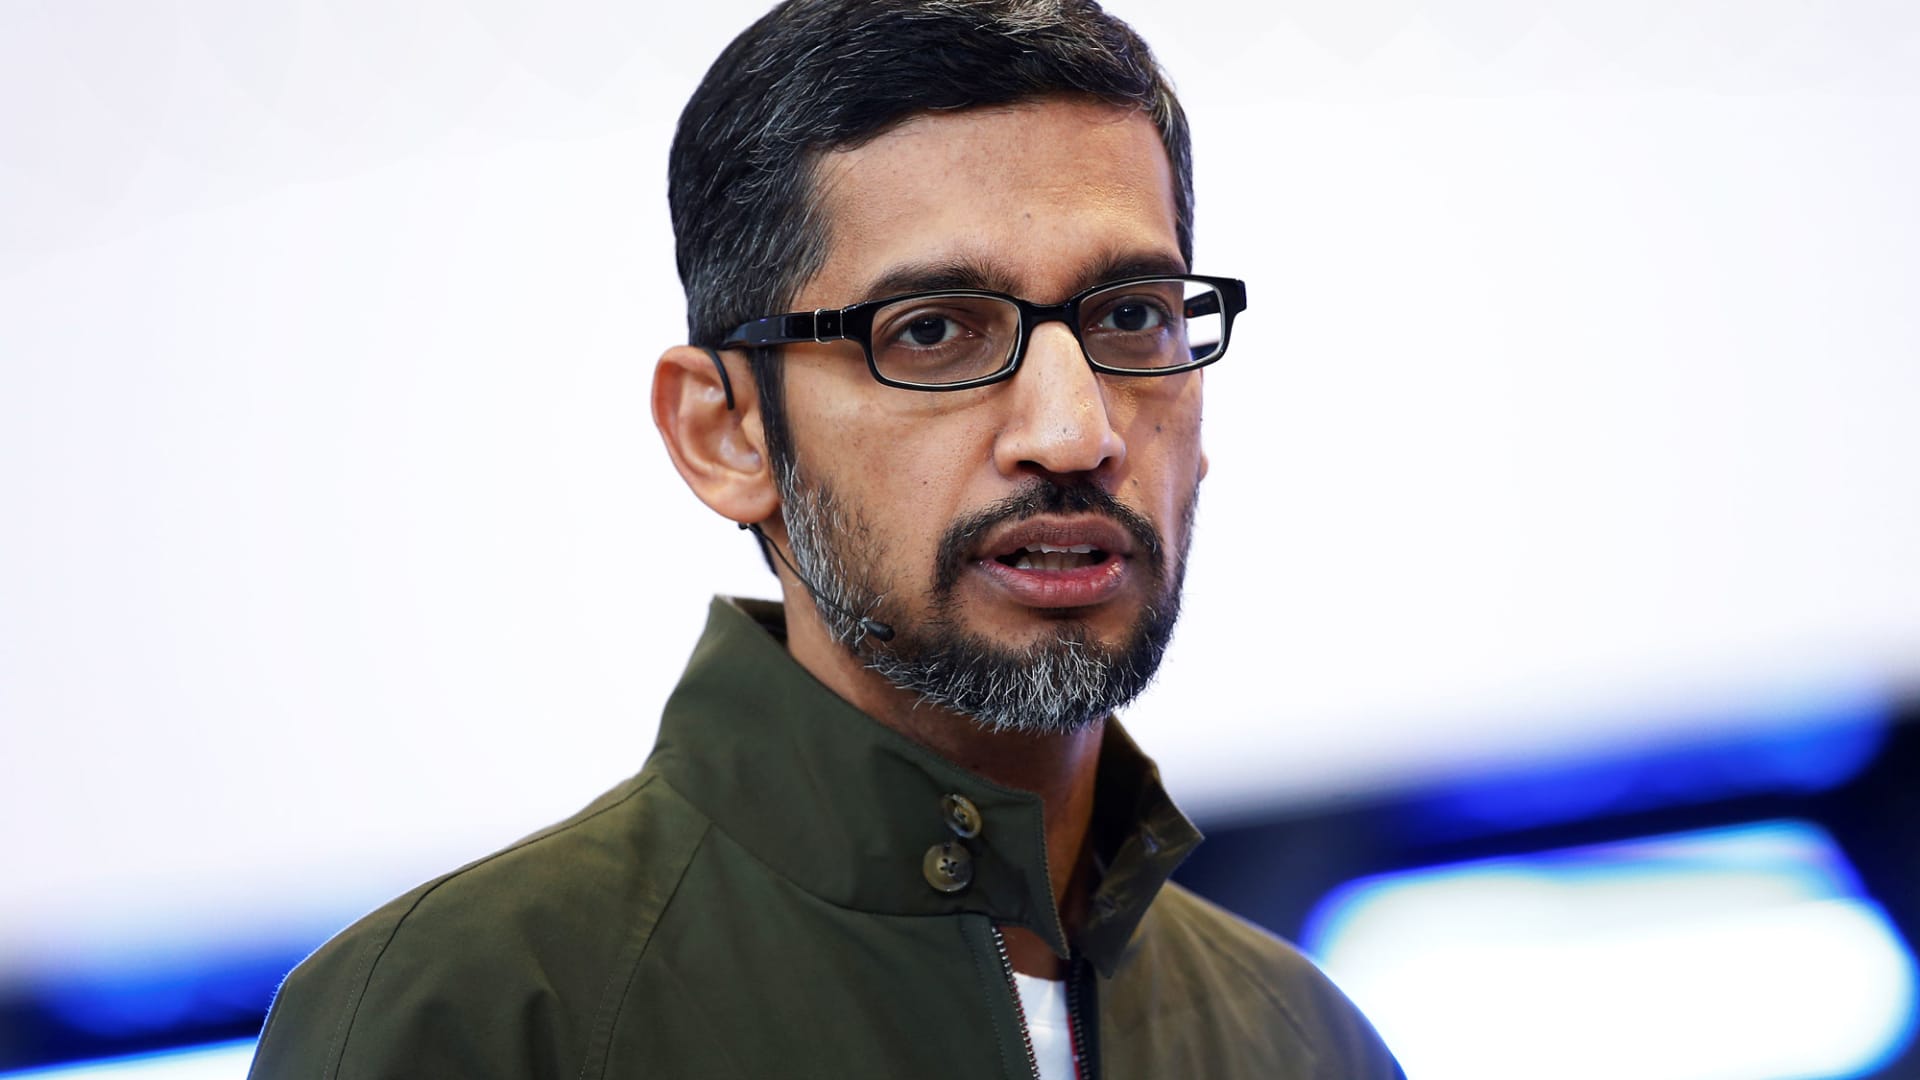 Google has avoided mass layoffs, but employees worry they’re coming